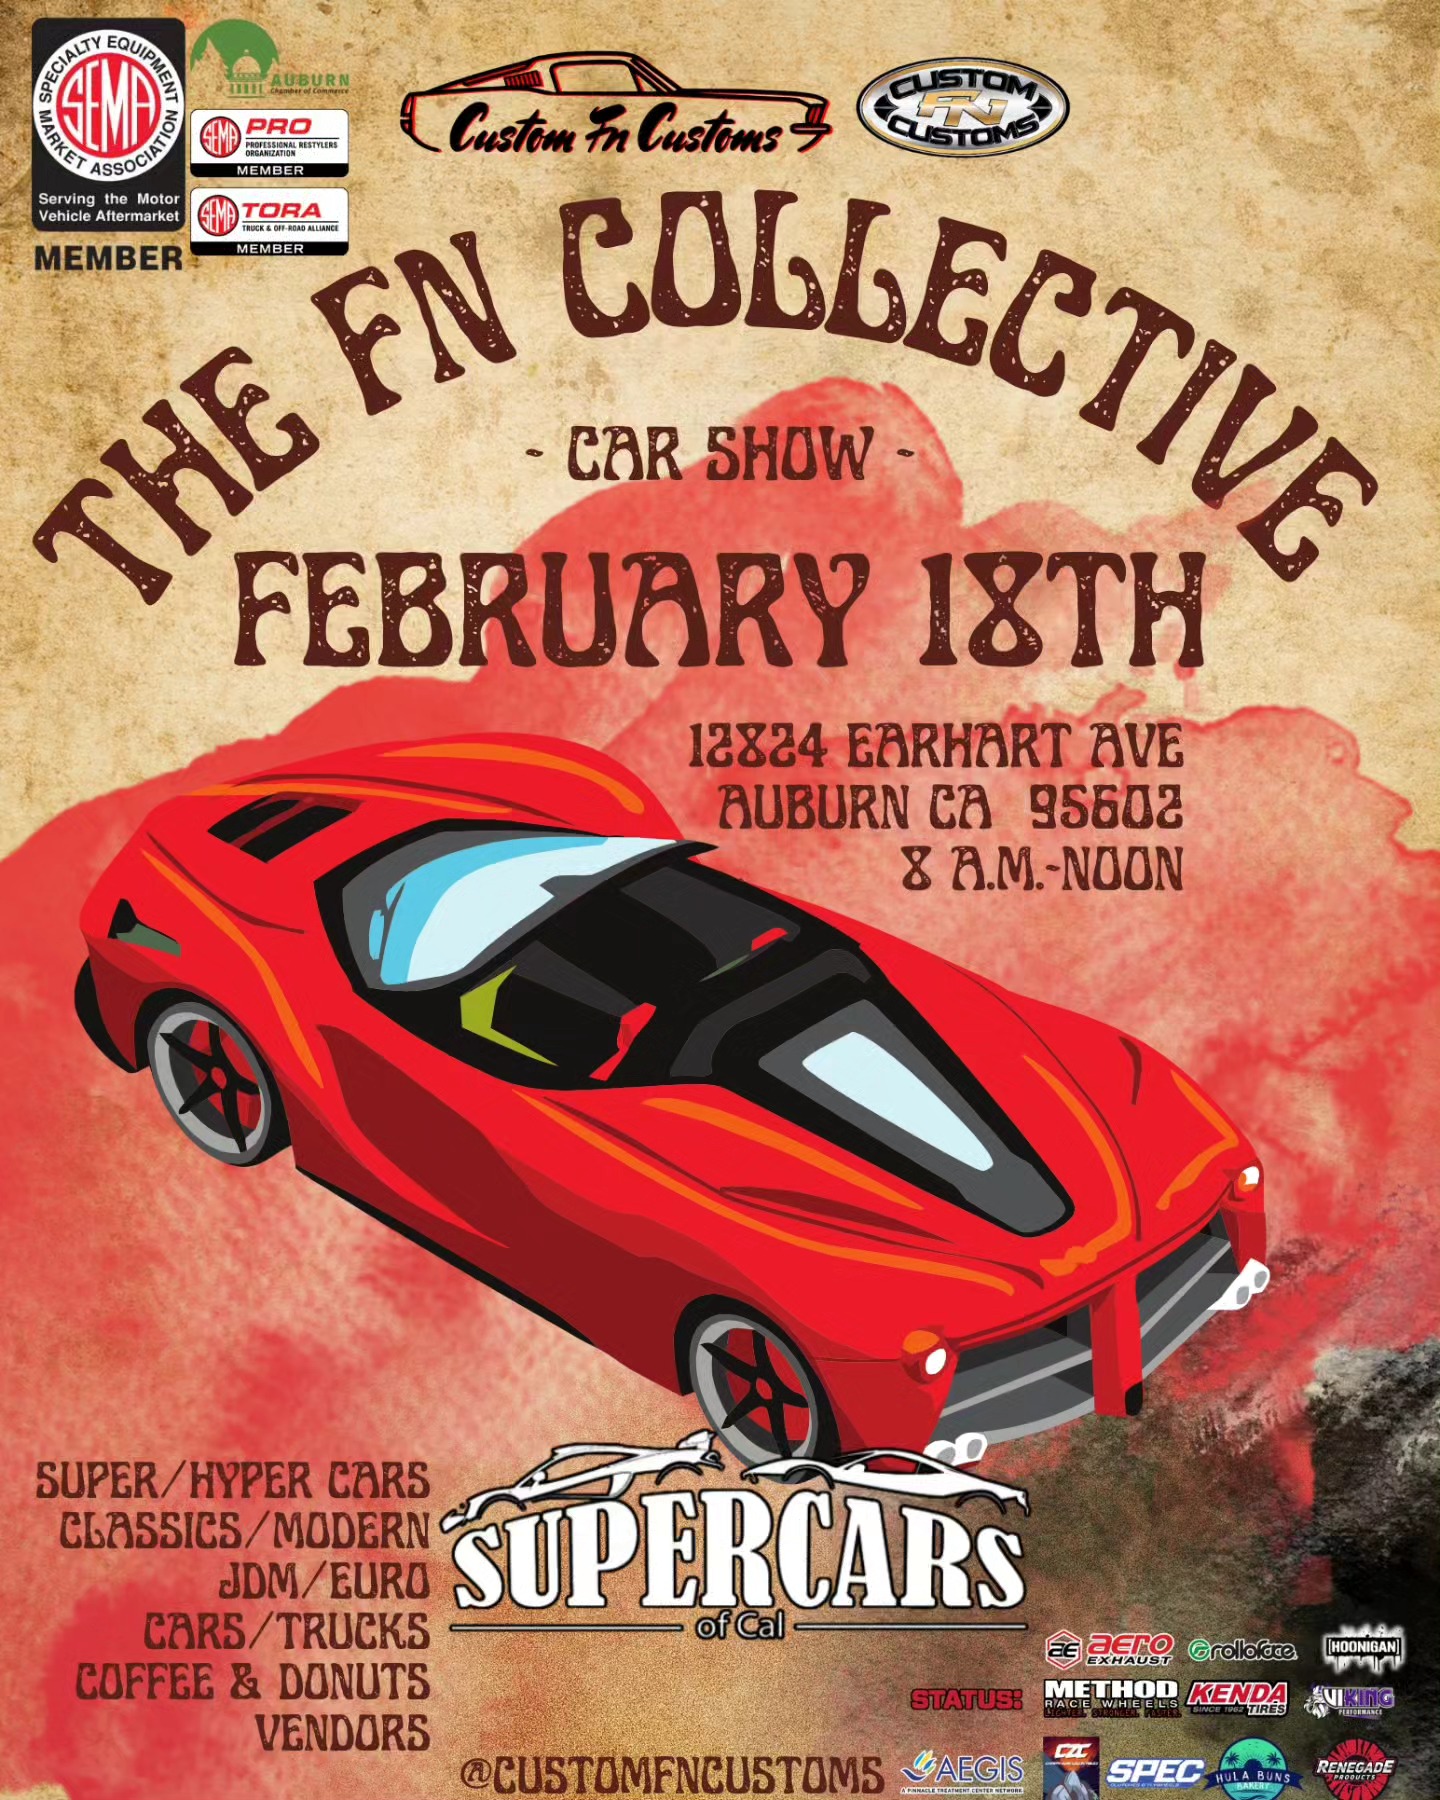 The FN Collective Car Show